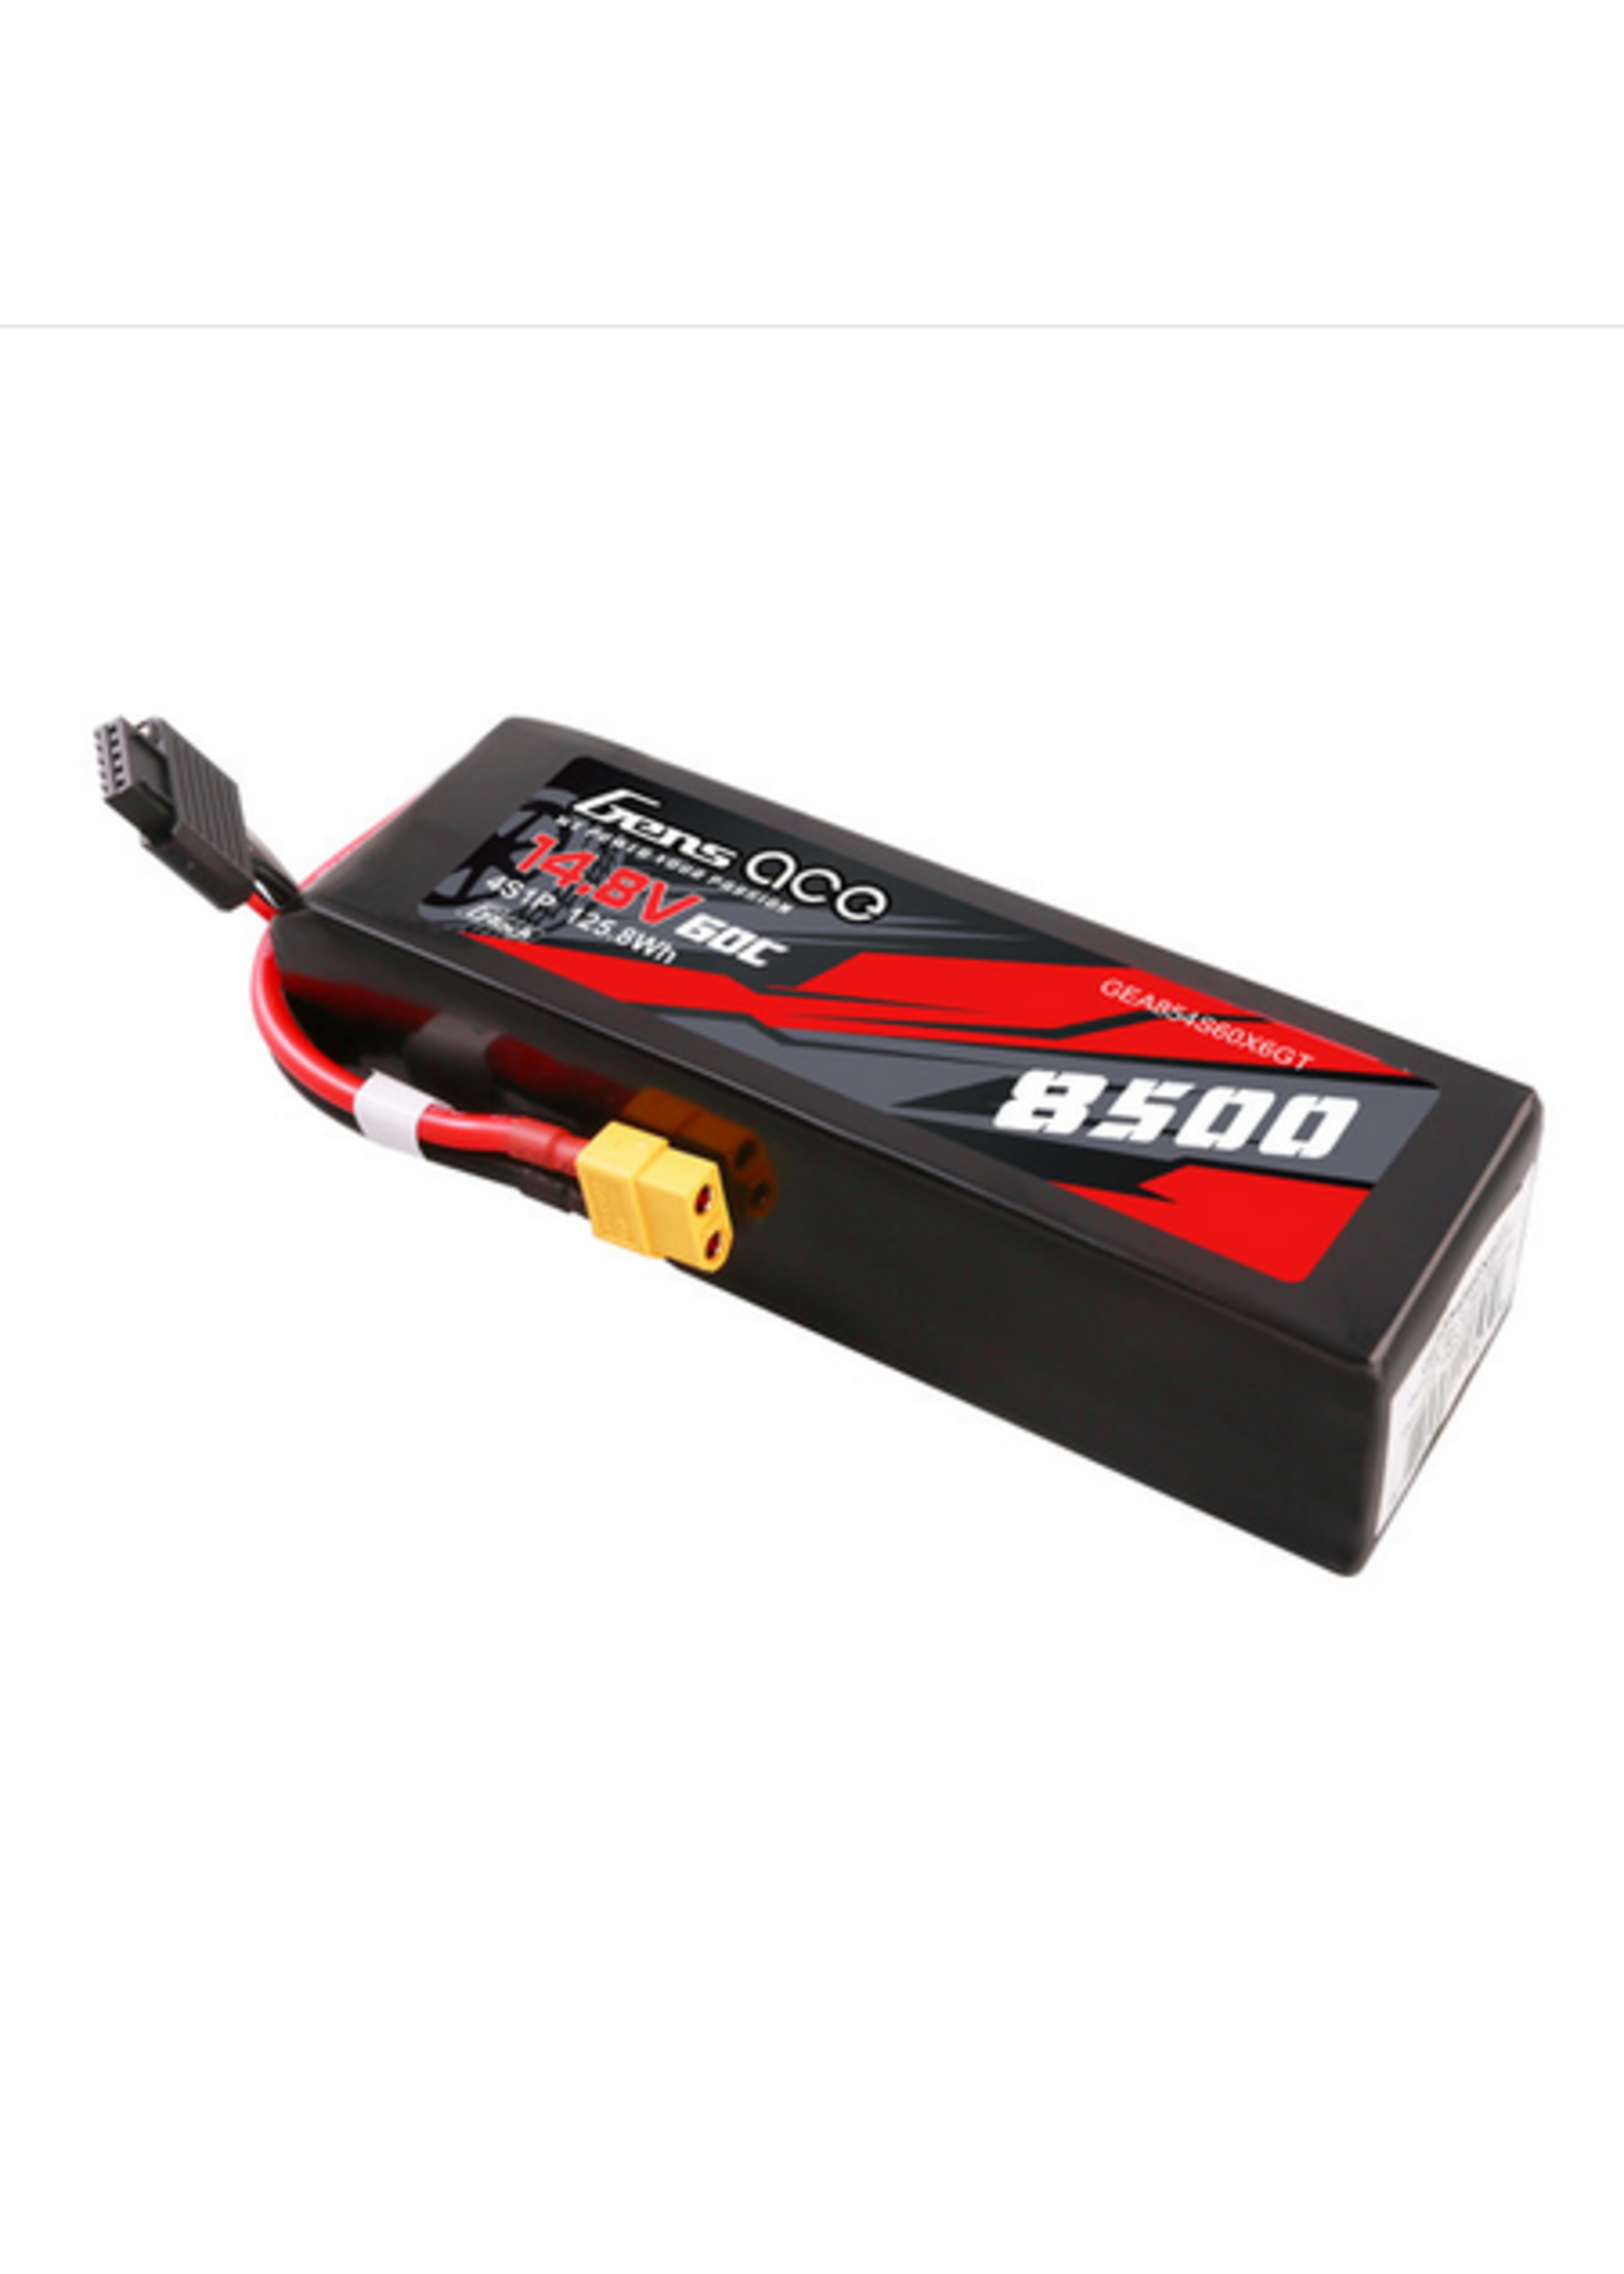 Gens Ace GEA854S60X6GT Gens Ace 14.8V 60C 4S 8500mAh G-tech Lipo Battery Pack with XT60 Plug for Xmaxx 8S Car